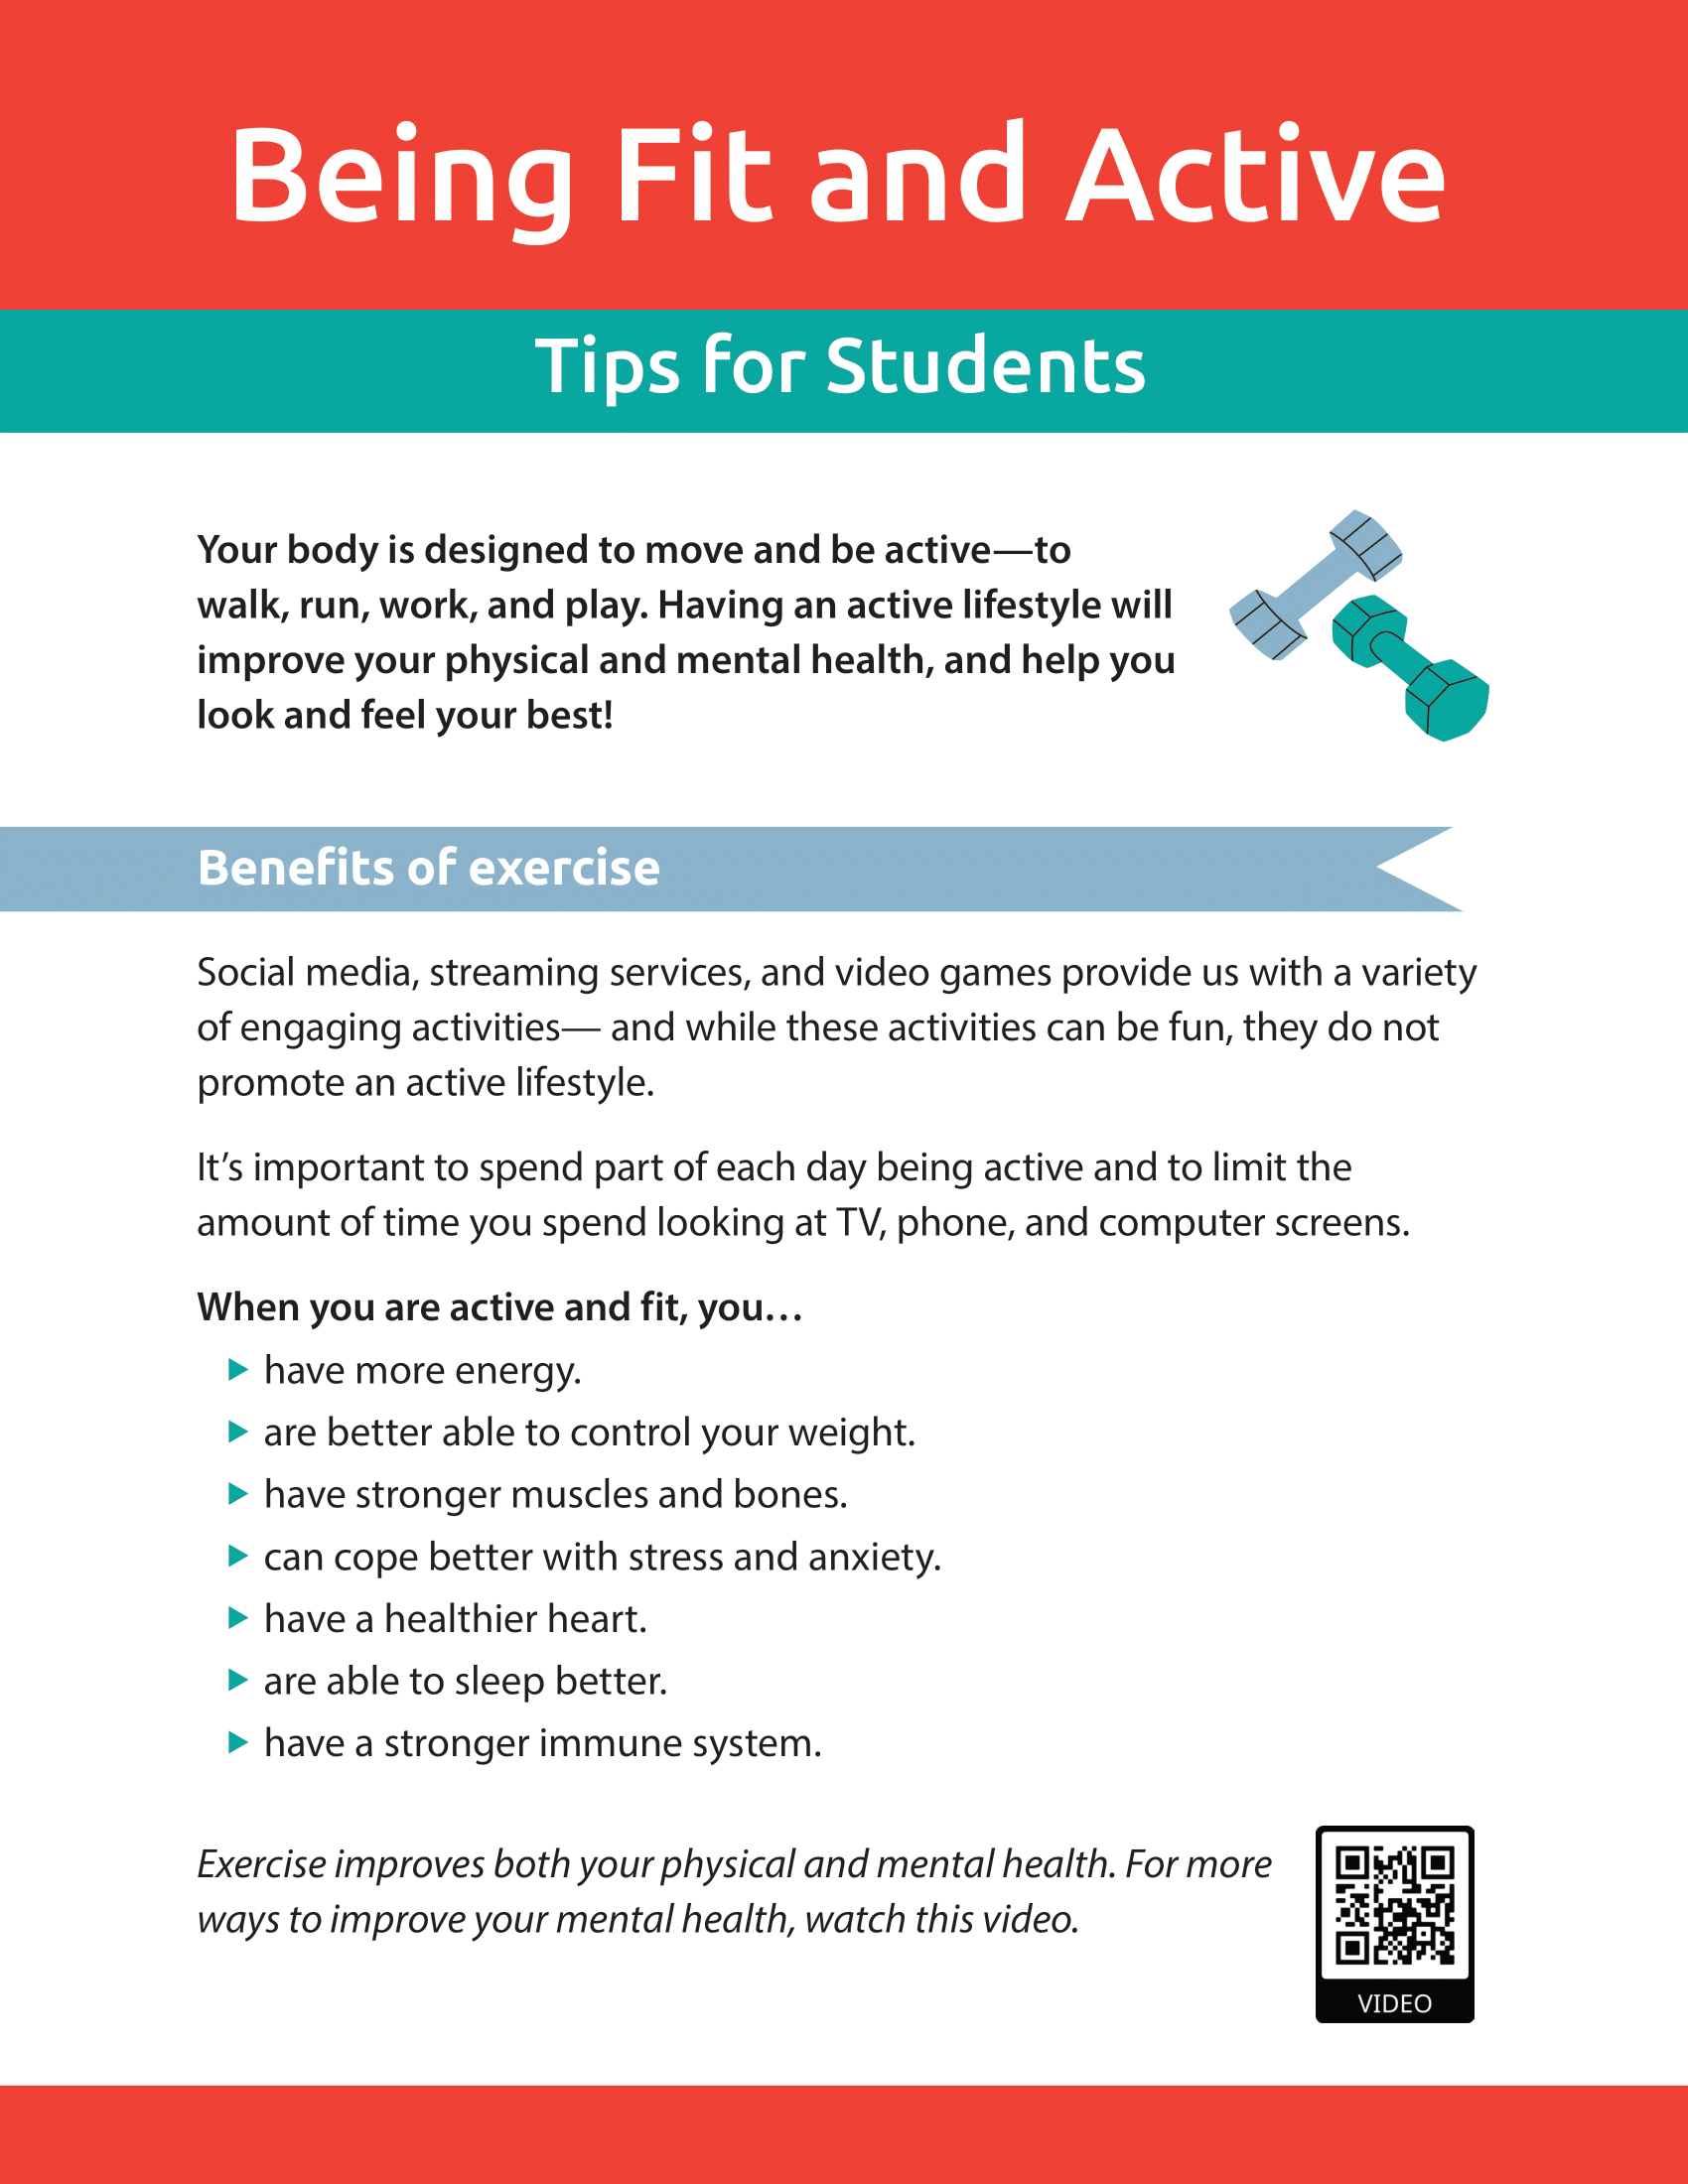 Being Fit and Active - Tips for Students